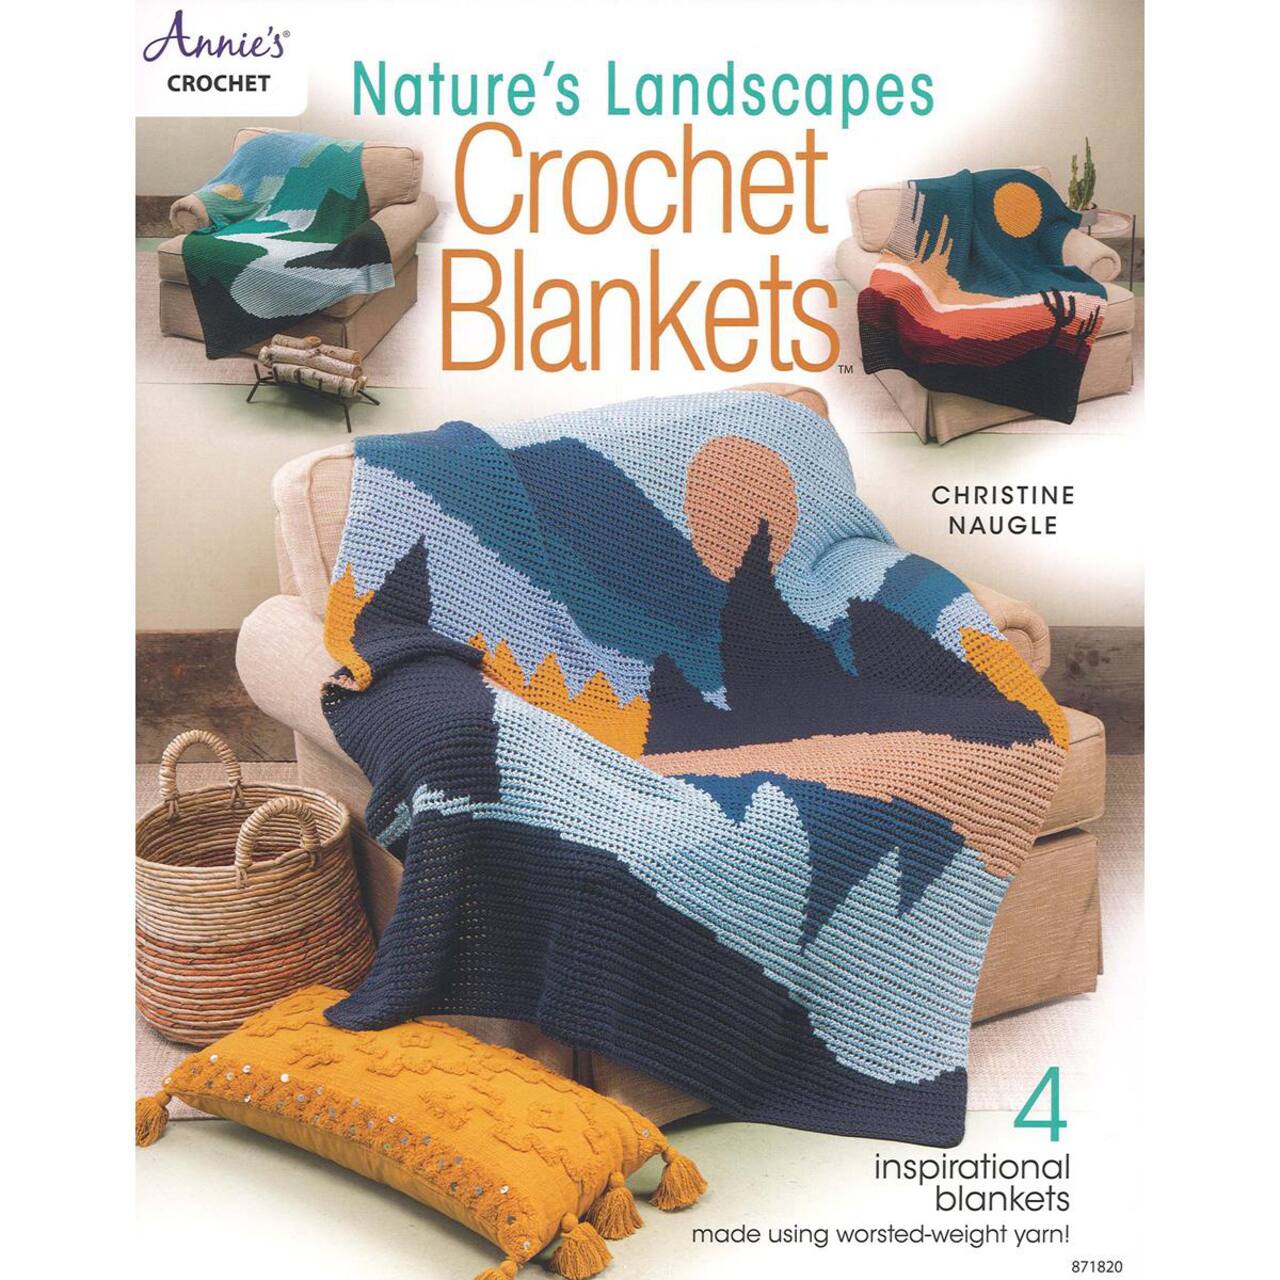 Annie's Nature's Landscapes Crochet Blankets Book